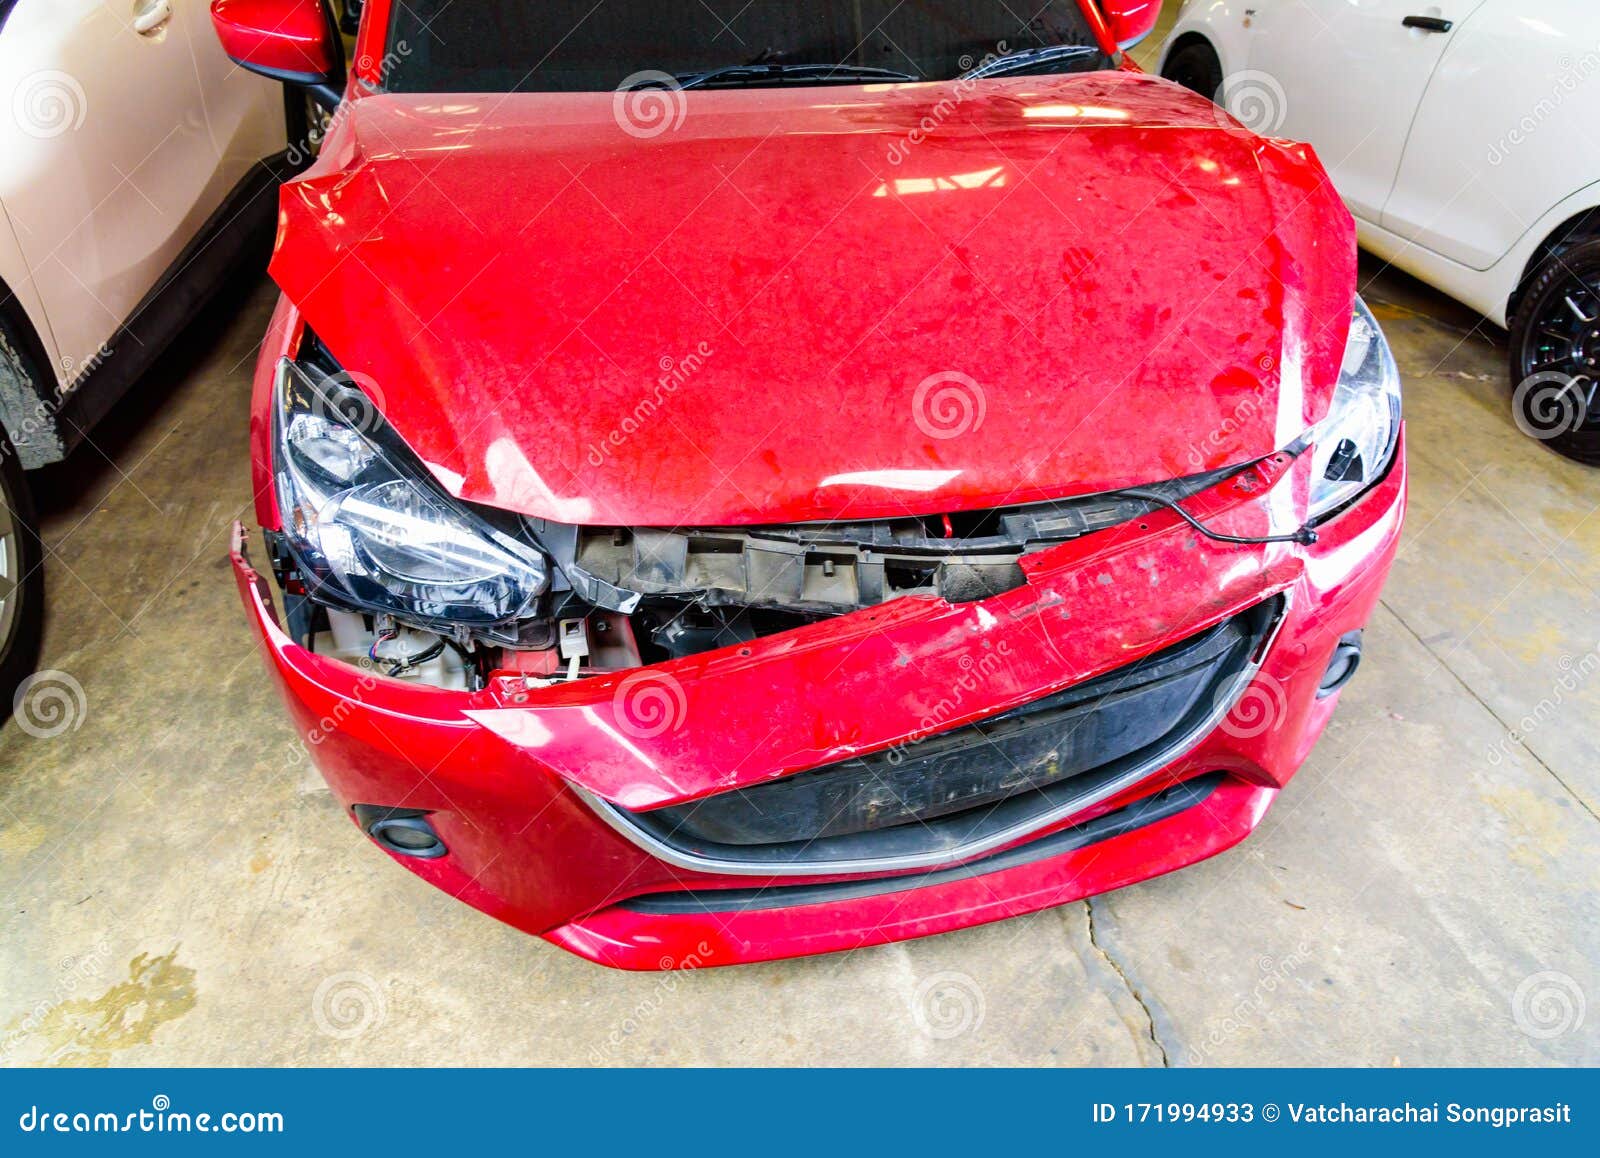 Front of Red Car Get Accident Hit the until Crash Stock of crash, collision: 171994933